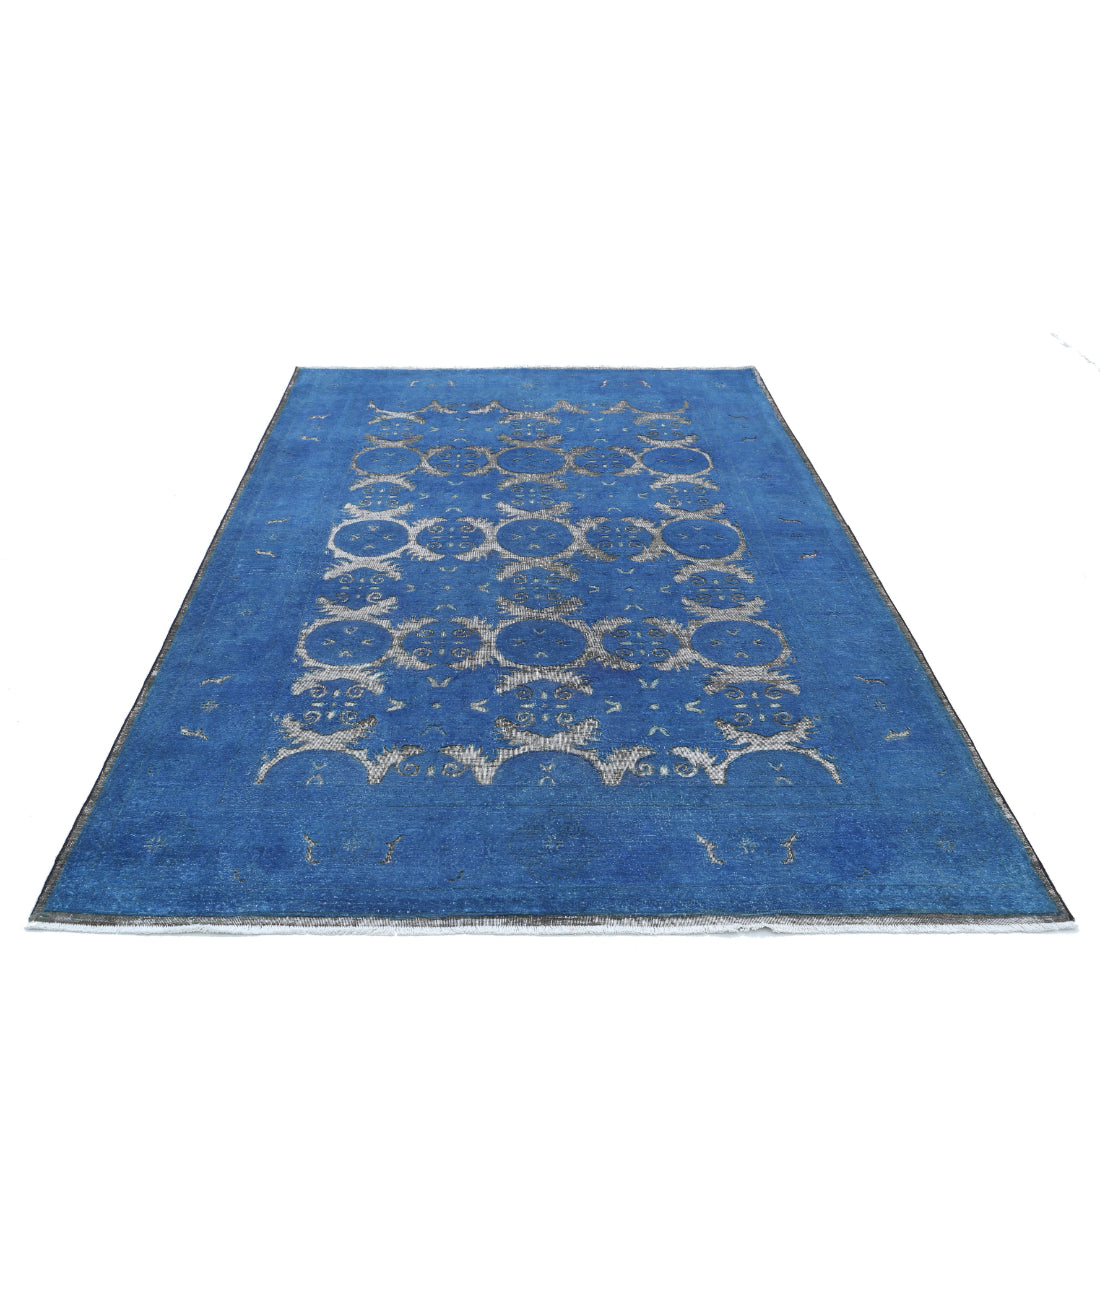 Hand Knotted Onyx Wool Rug - 5'10'' x 7'8'' 5'10'' x 7'8'' (175 X 230) / Blue / Blue